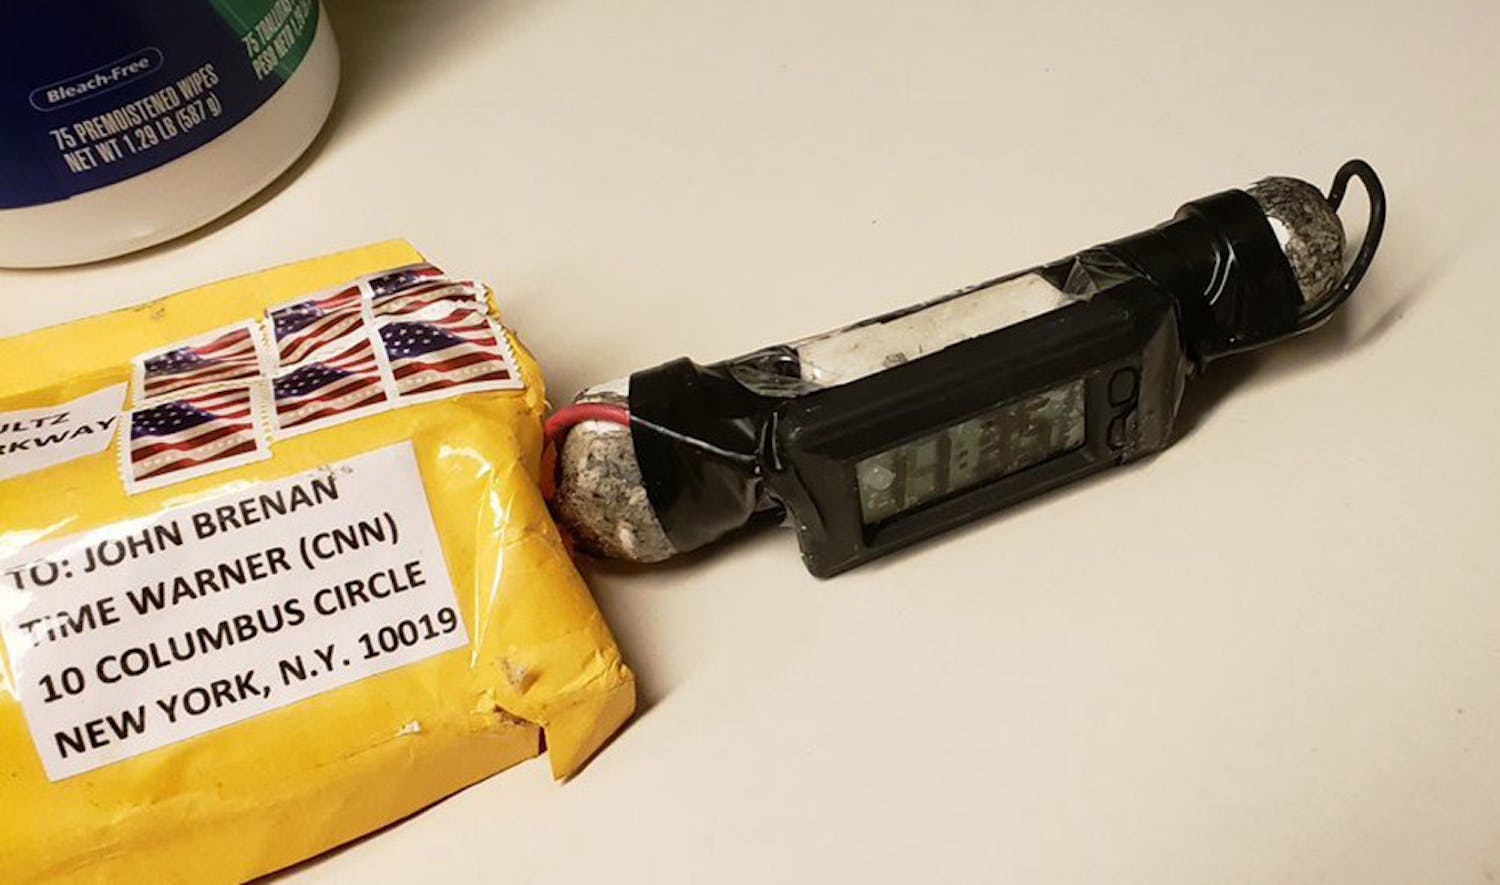 This image obtained Wednesday, Oct. 24, 2018, and provided by ABC News shows a package addressed to former CIA head John Brennan and an explosive device that was sent to CNN's New York office. The mail-bomb scare widened Thursday as law enforcement officials seized more suspicious packages.